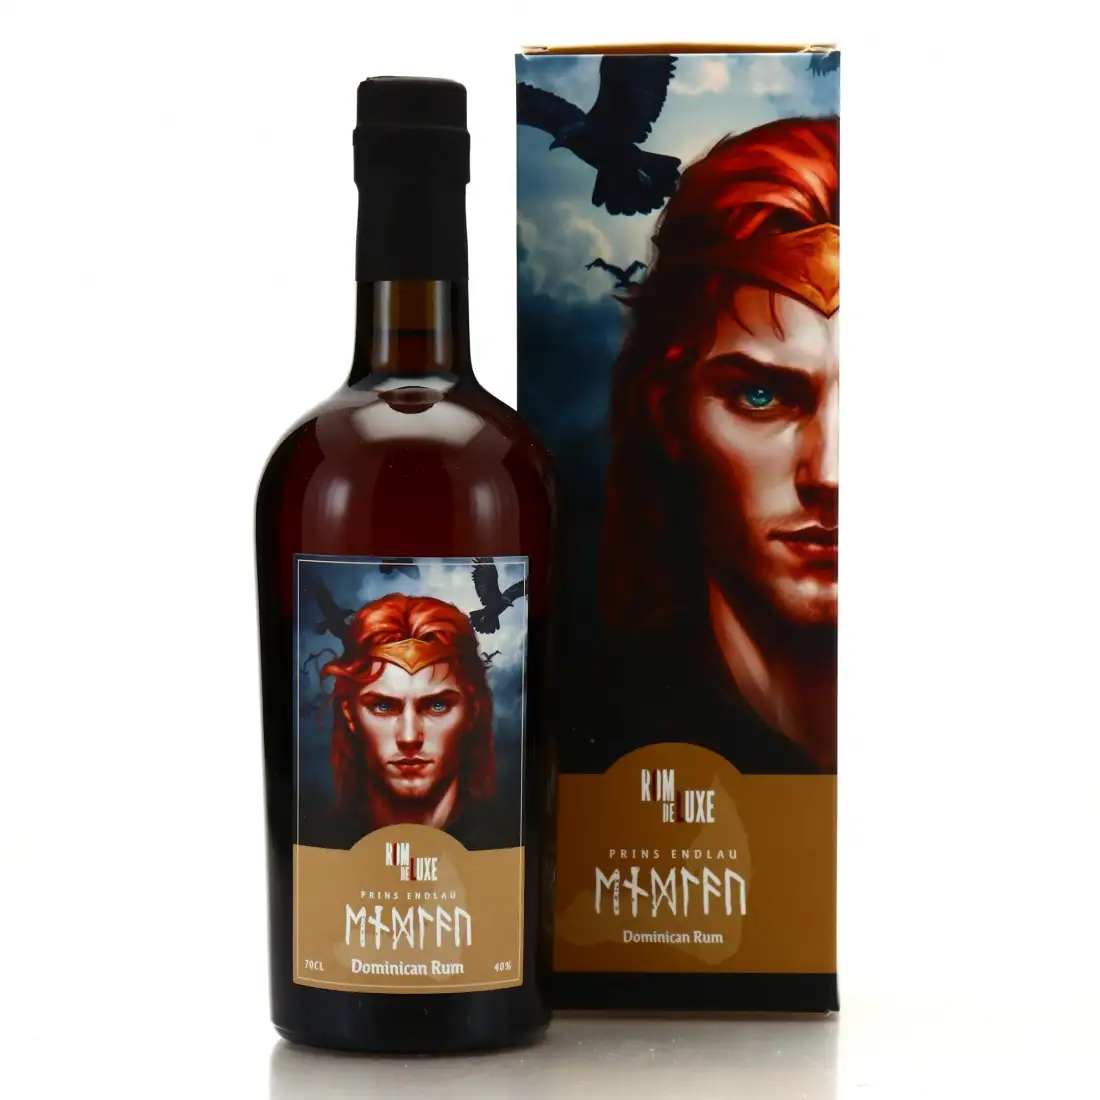 Image of the front of the bottle of the rum Prins Endlau - Dominican Rum